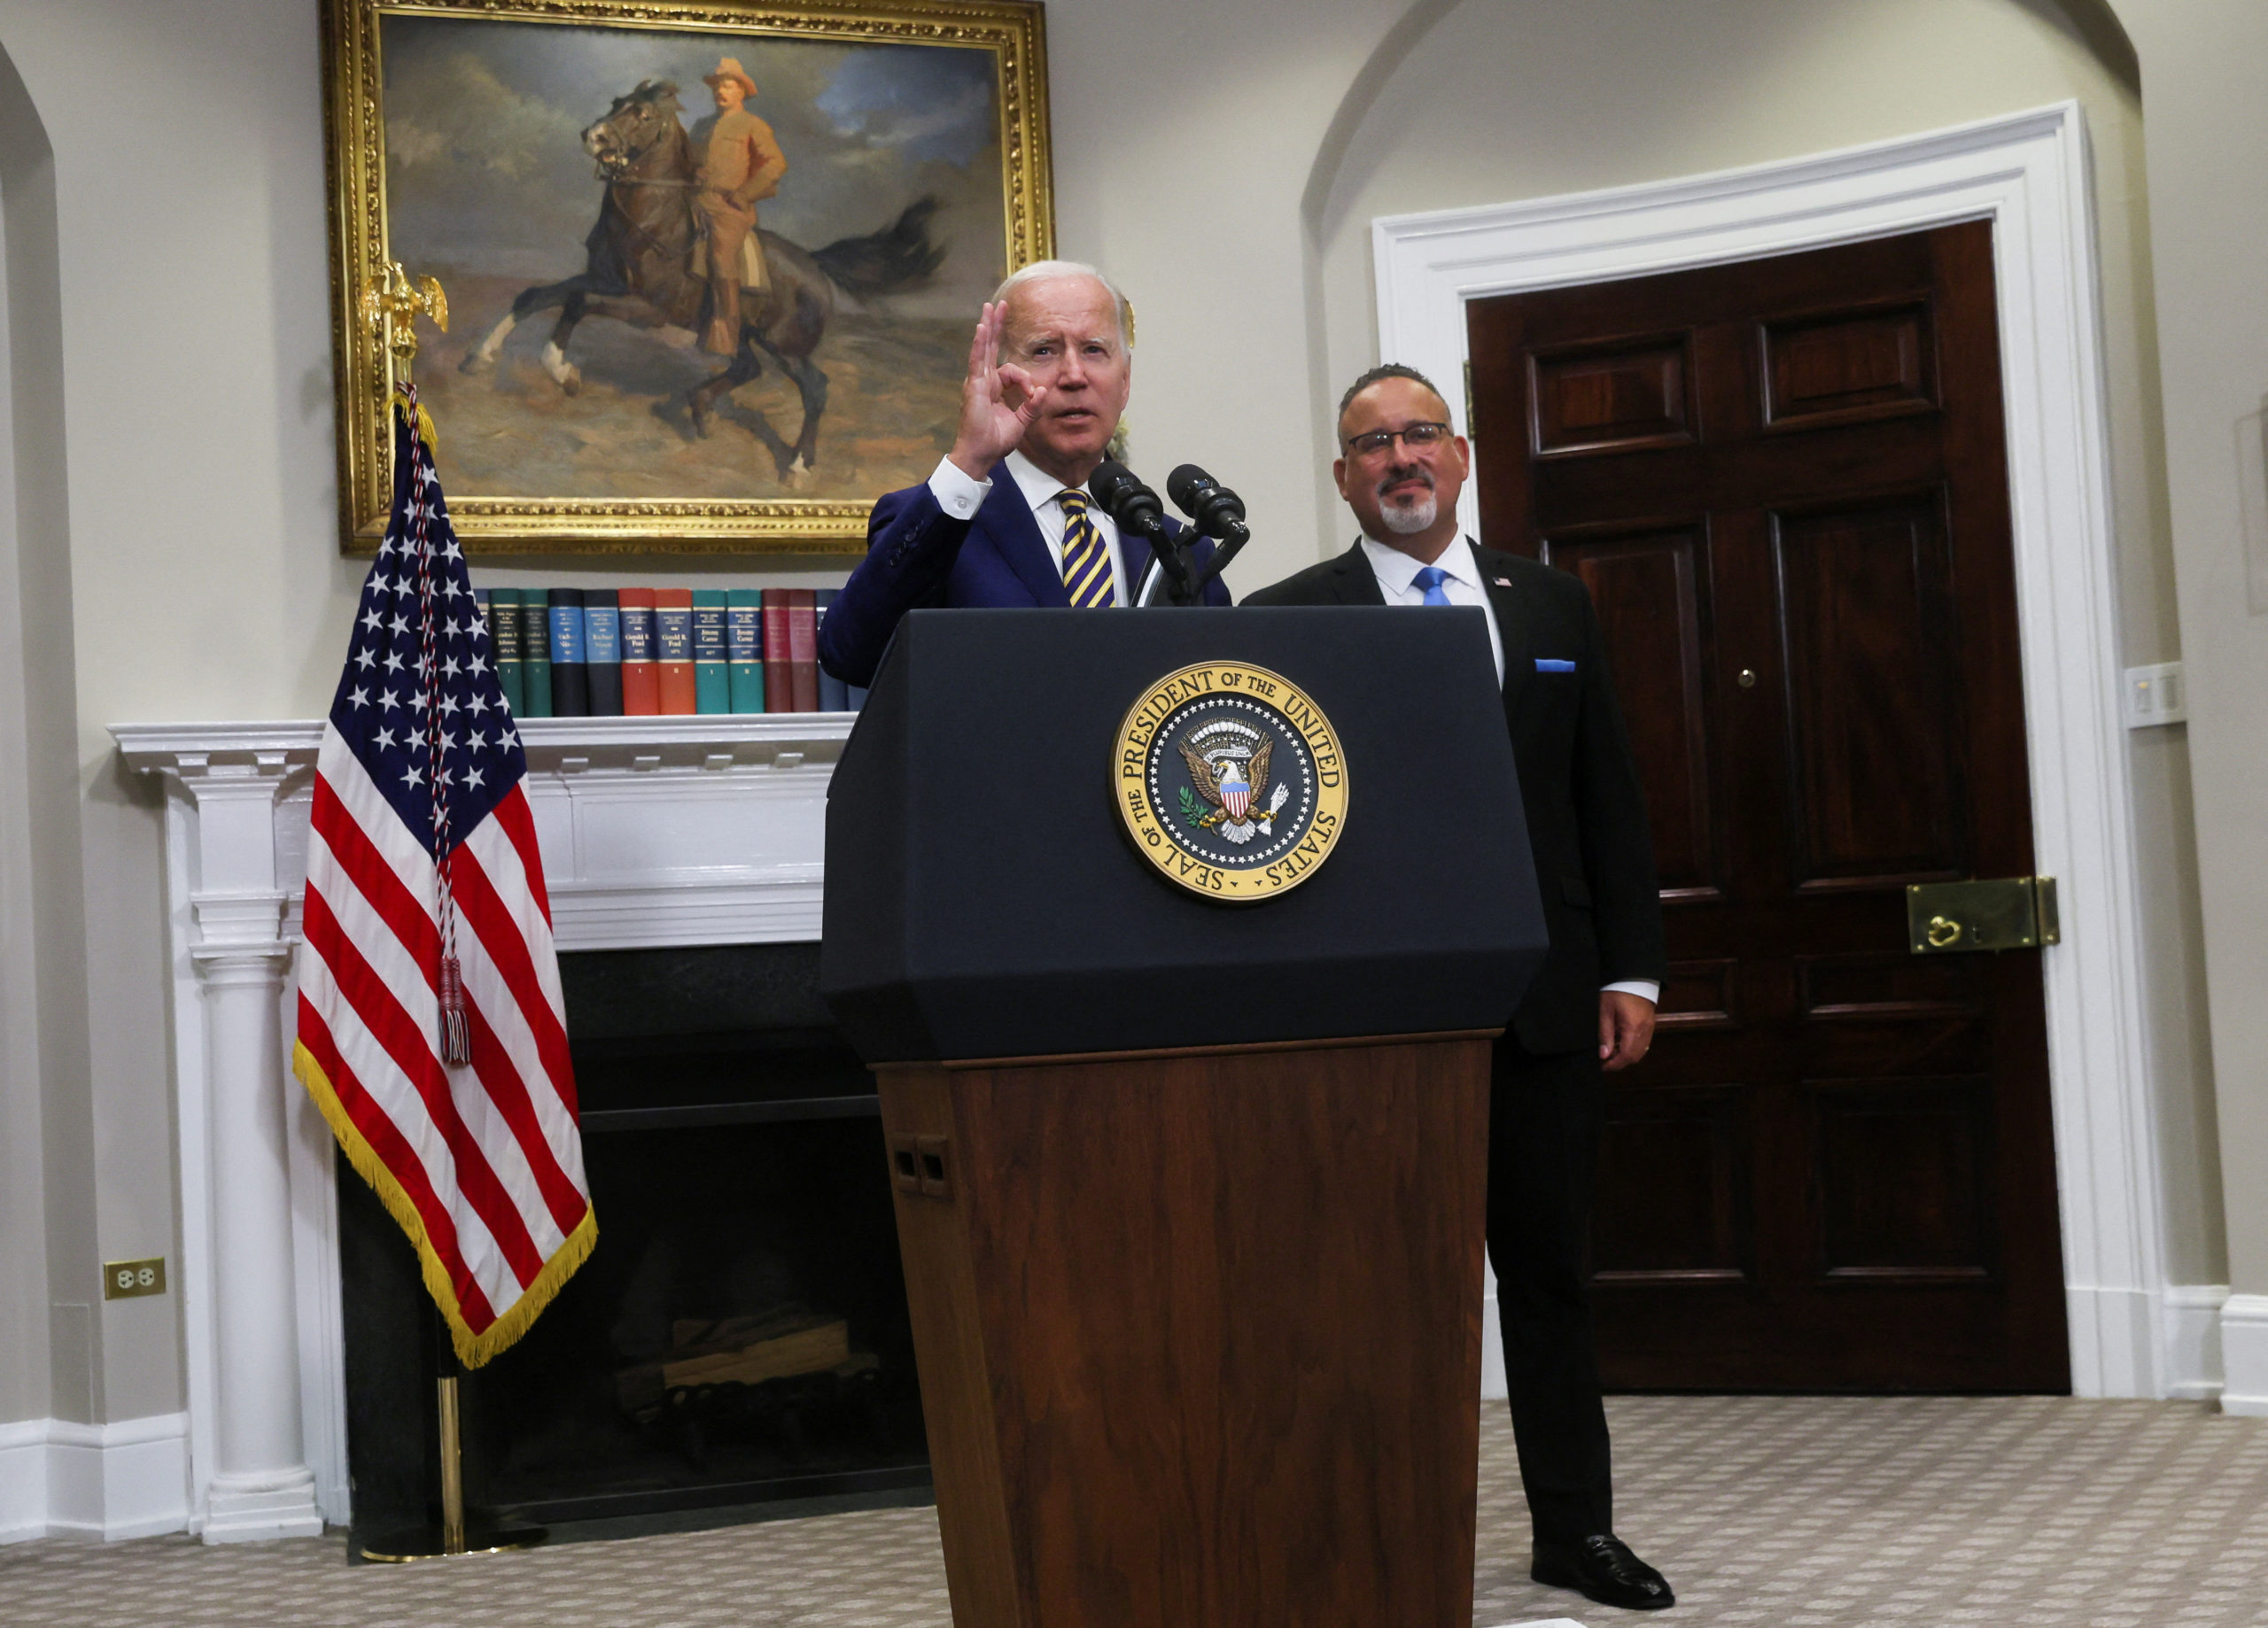 U.S. President Joe Biden gestures as he responds to a question about whether he had any advance notice of the FBI's plan to search former President Donald Trump's home at Mar-a-Lago saying " I didn't have any advance notice, none, zero, not one single bit" after making remarks about forgiving federal student loan debt with U.S. Education Secretary Miguel Cardona at his side in the Roosevelt Room at the White House in Washington, U.S., August 24, 2022. REUTERS/Leah Millis